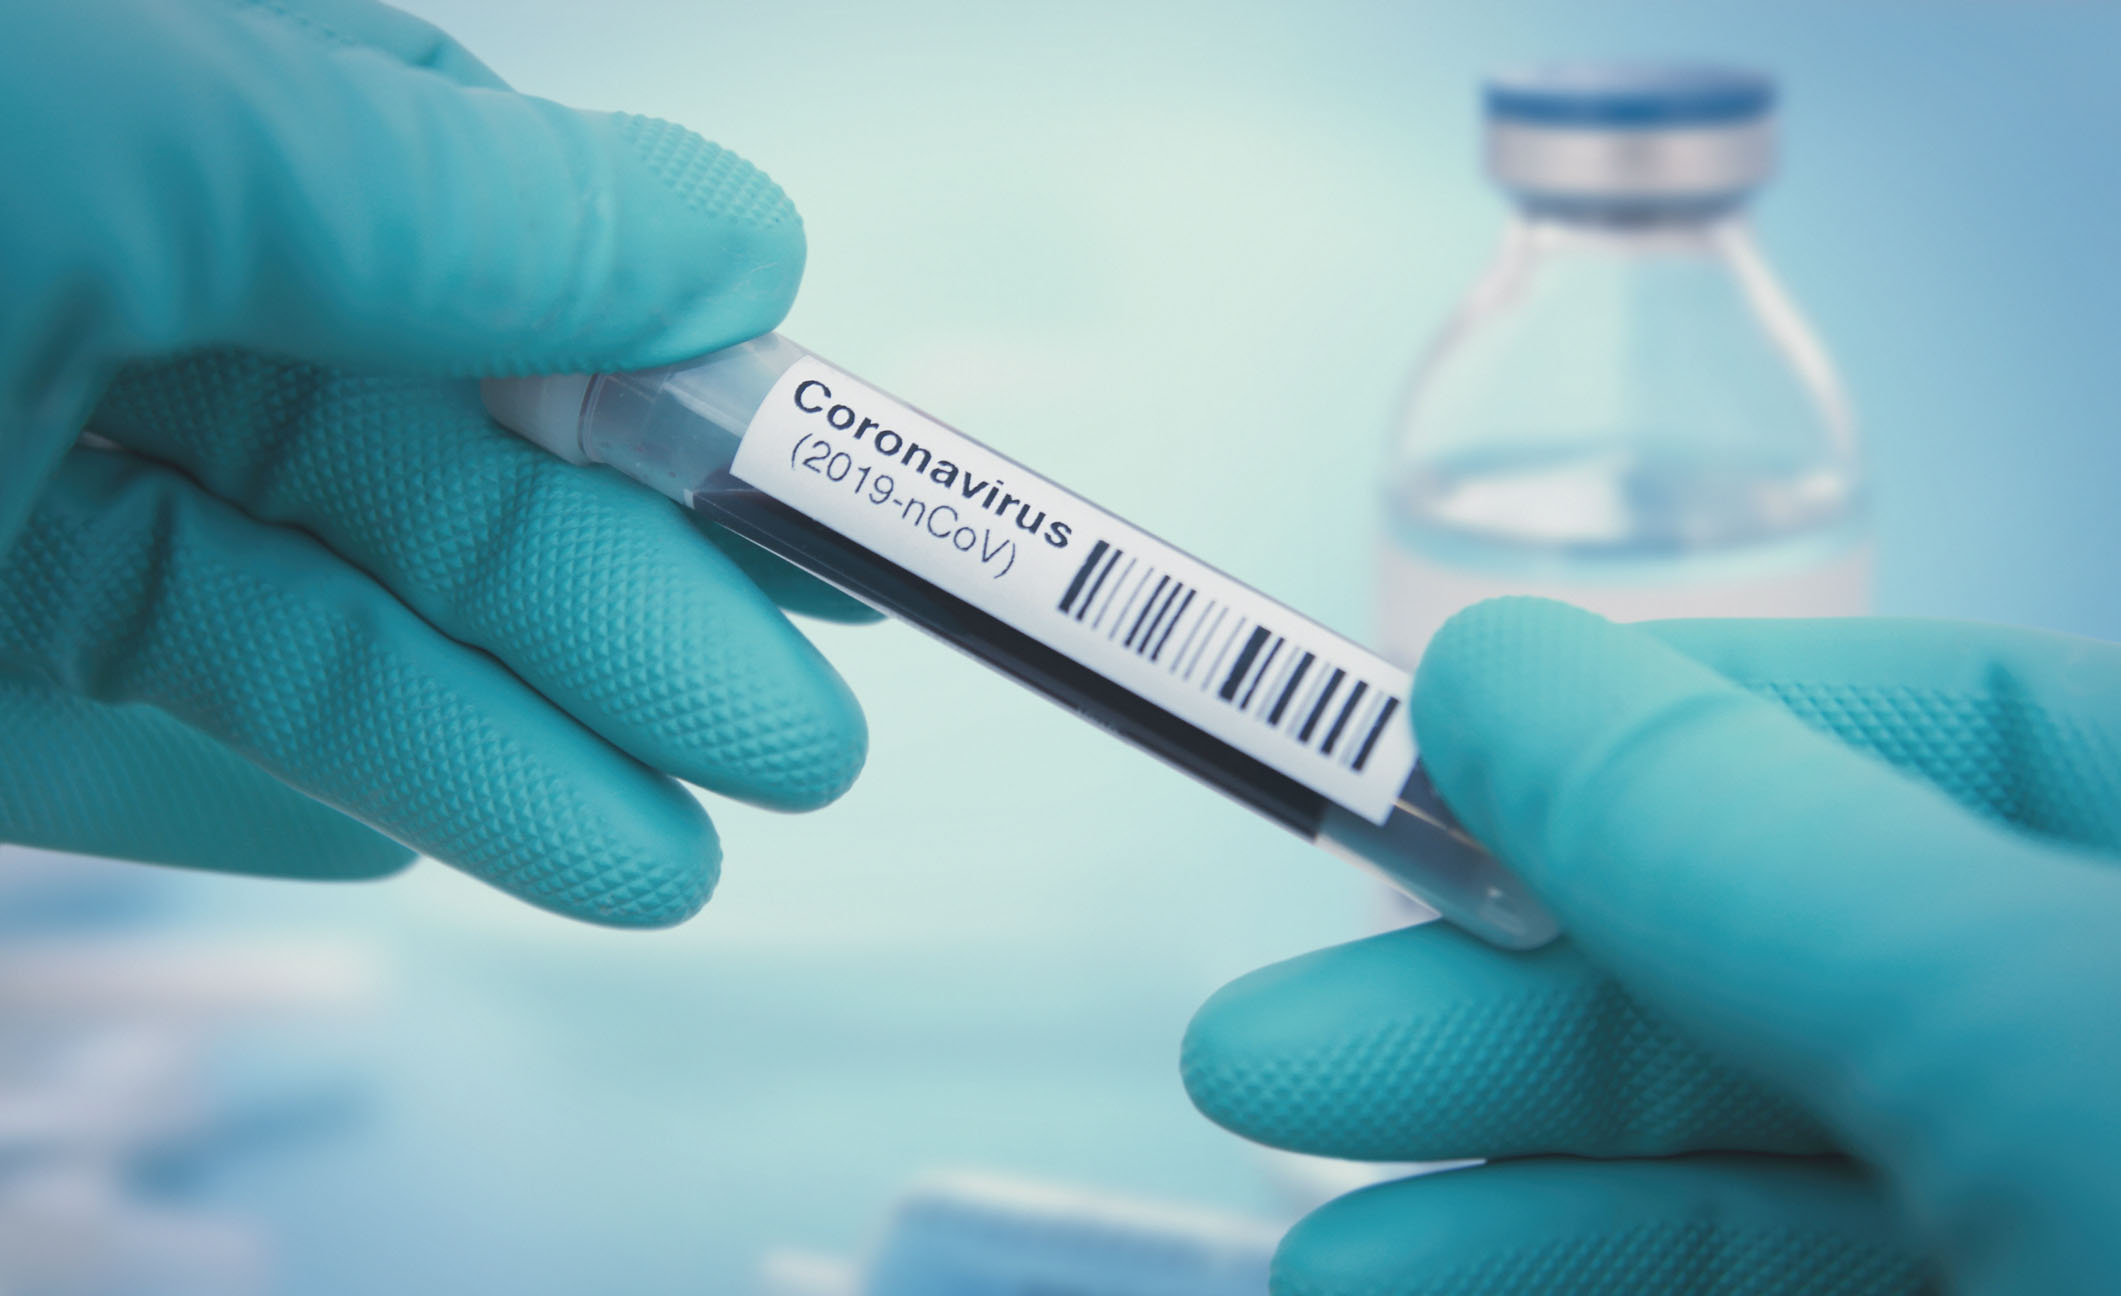 As the new coronavirus continues to spread, healthcare workers around the world have been forced to decide who lives and who dies. Photo by iStock.